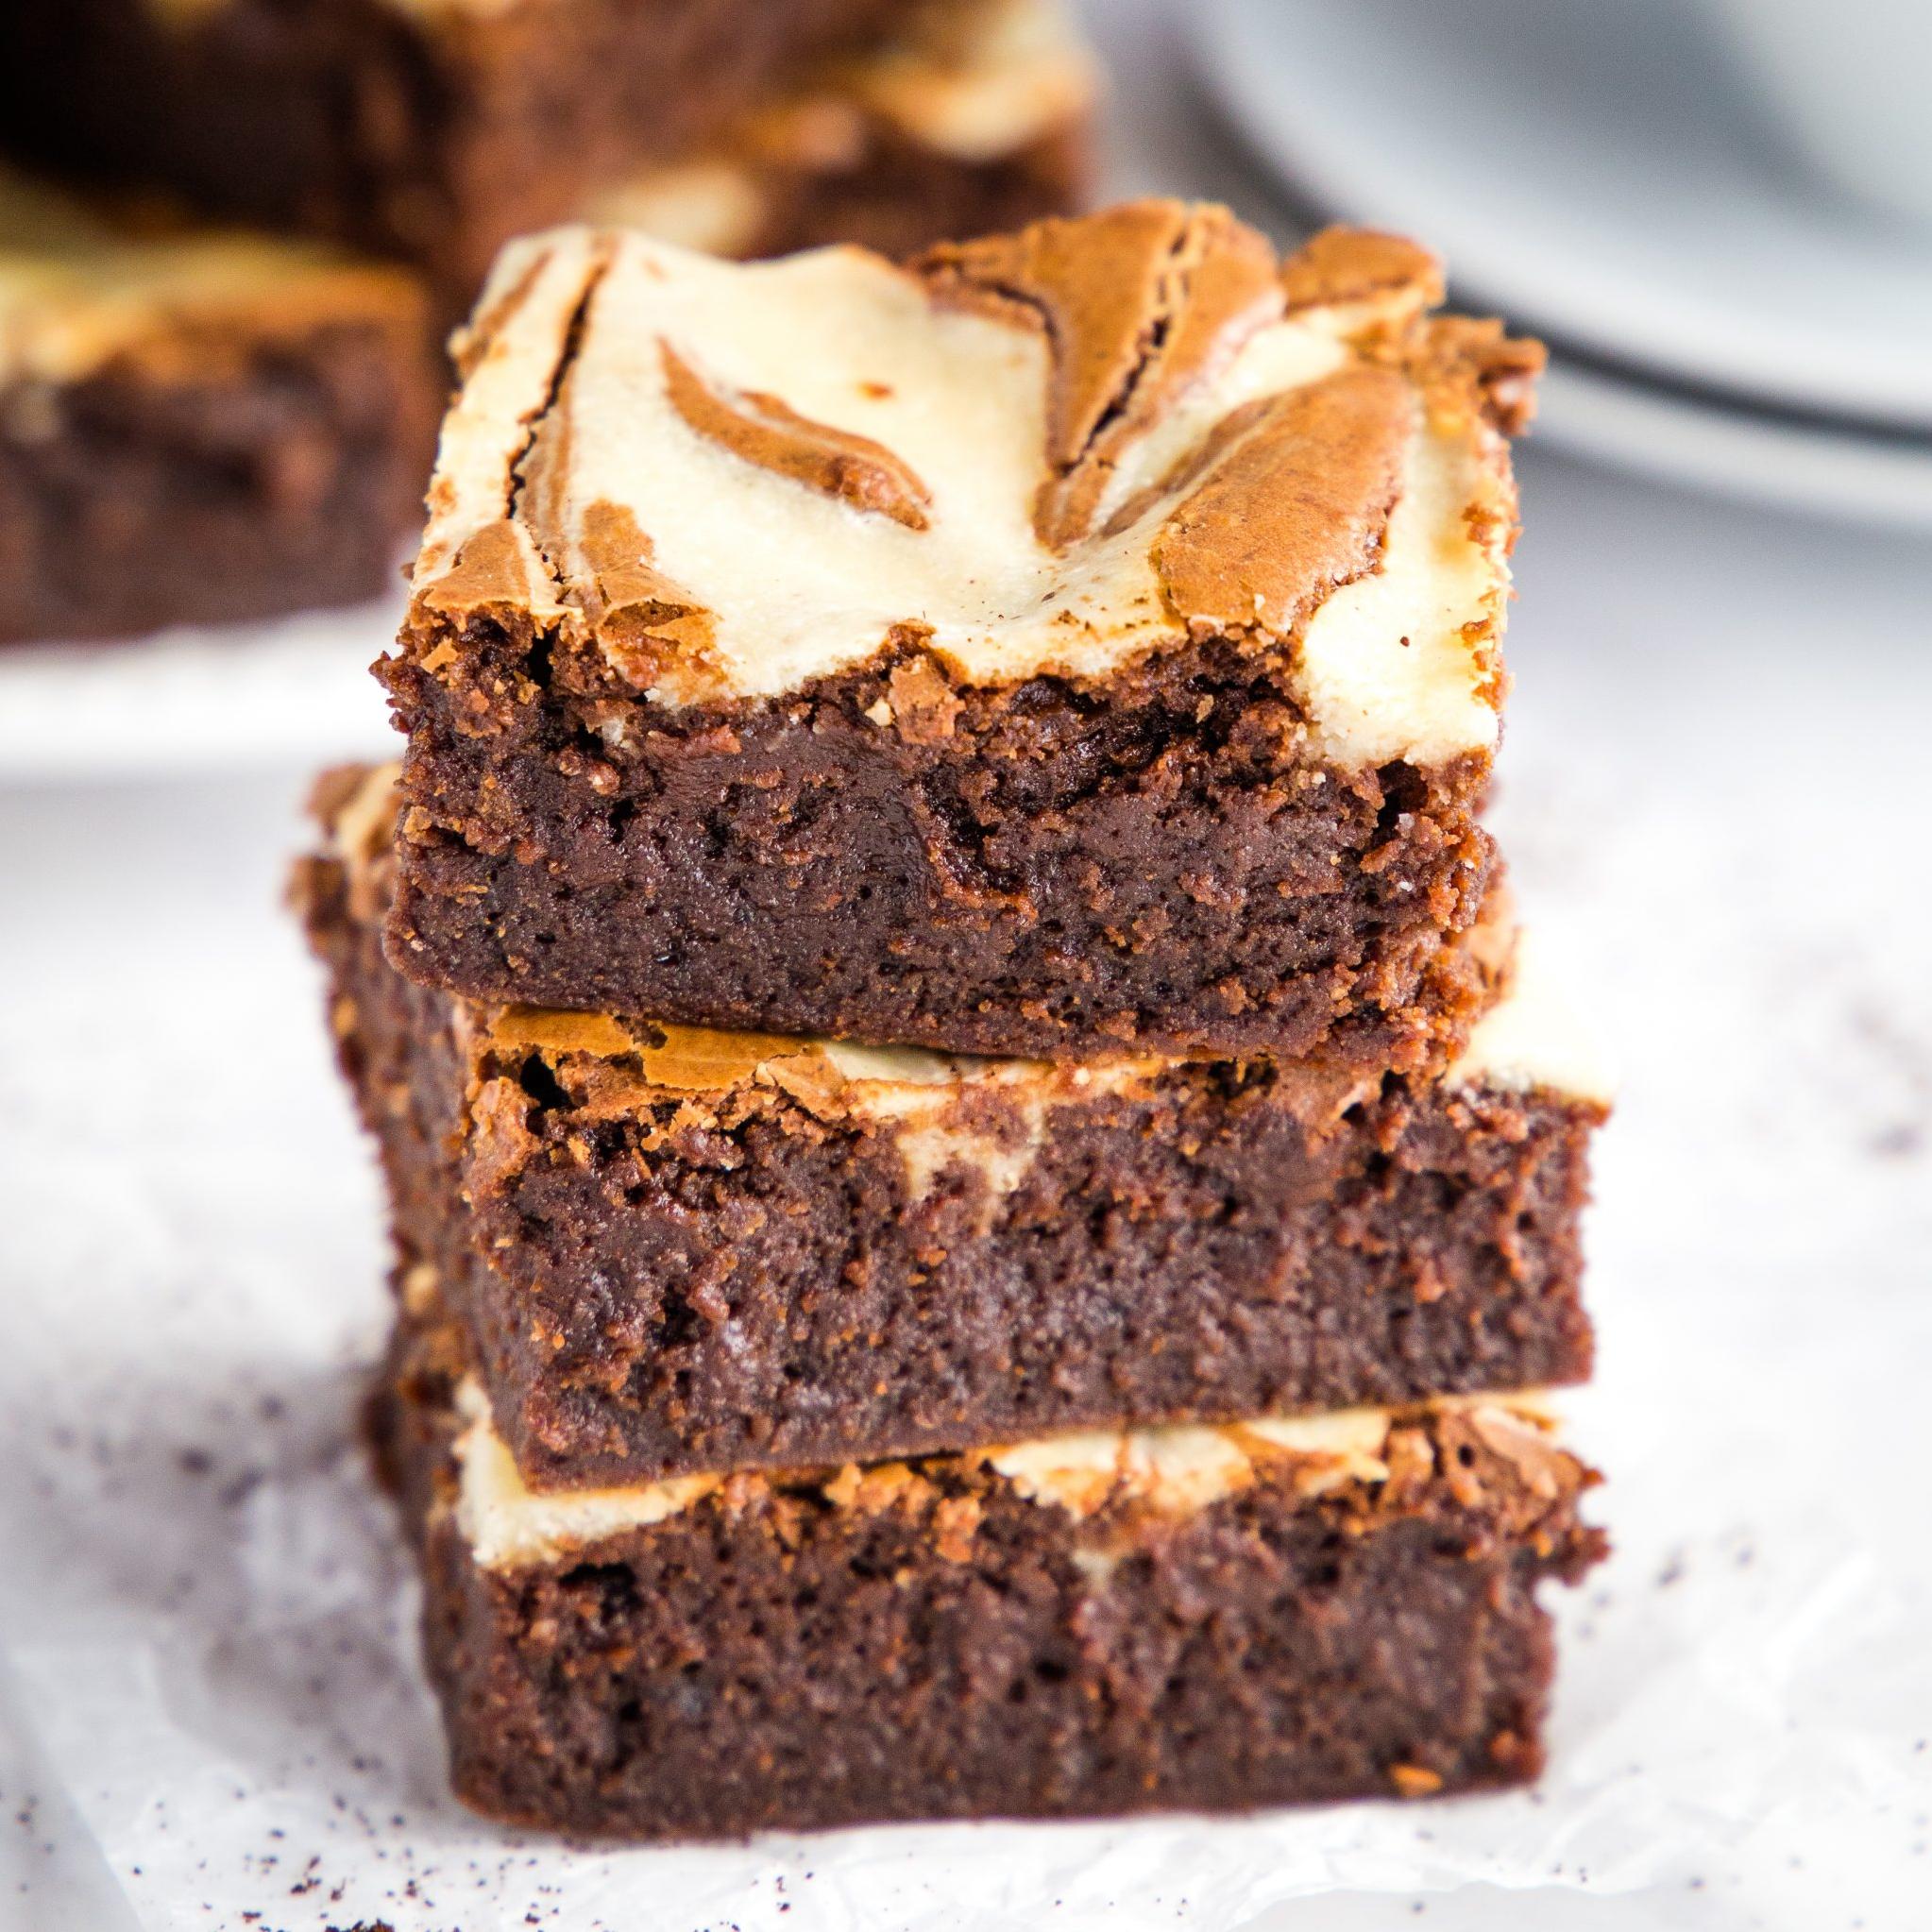  Indulge in a slice of heaven with our Mocha Brownie Cheesecake!